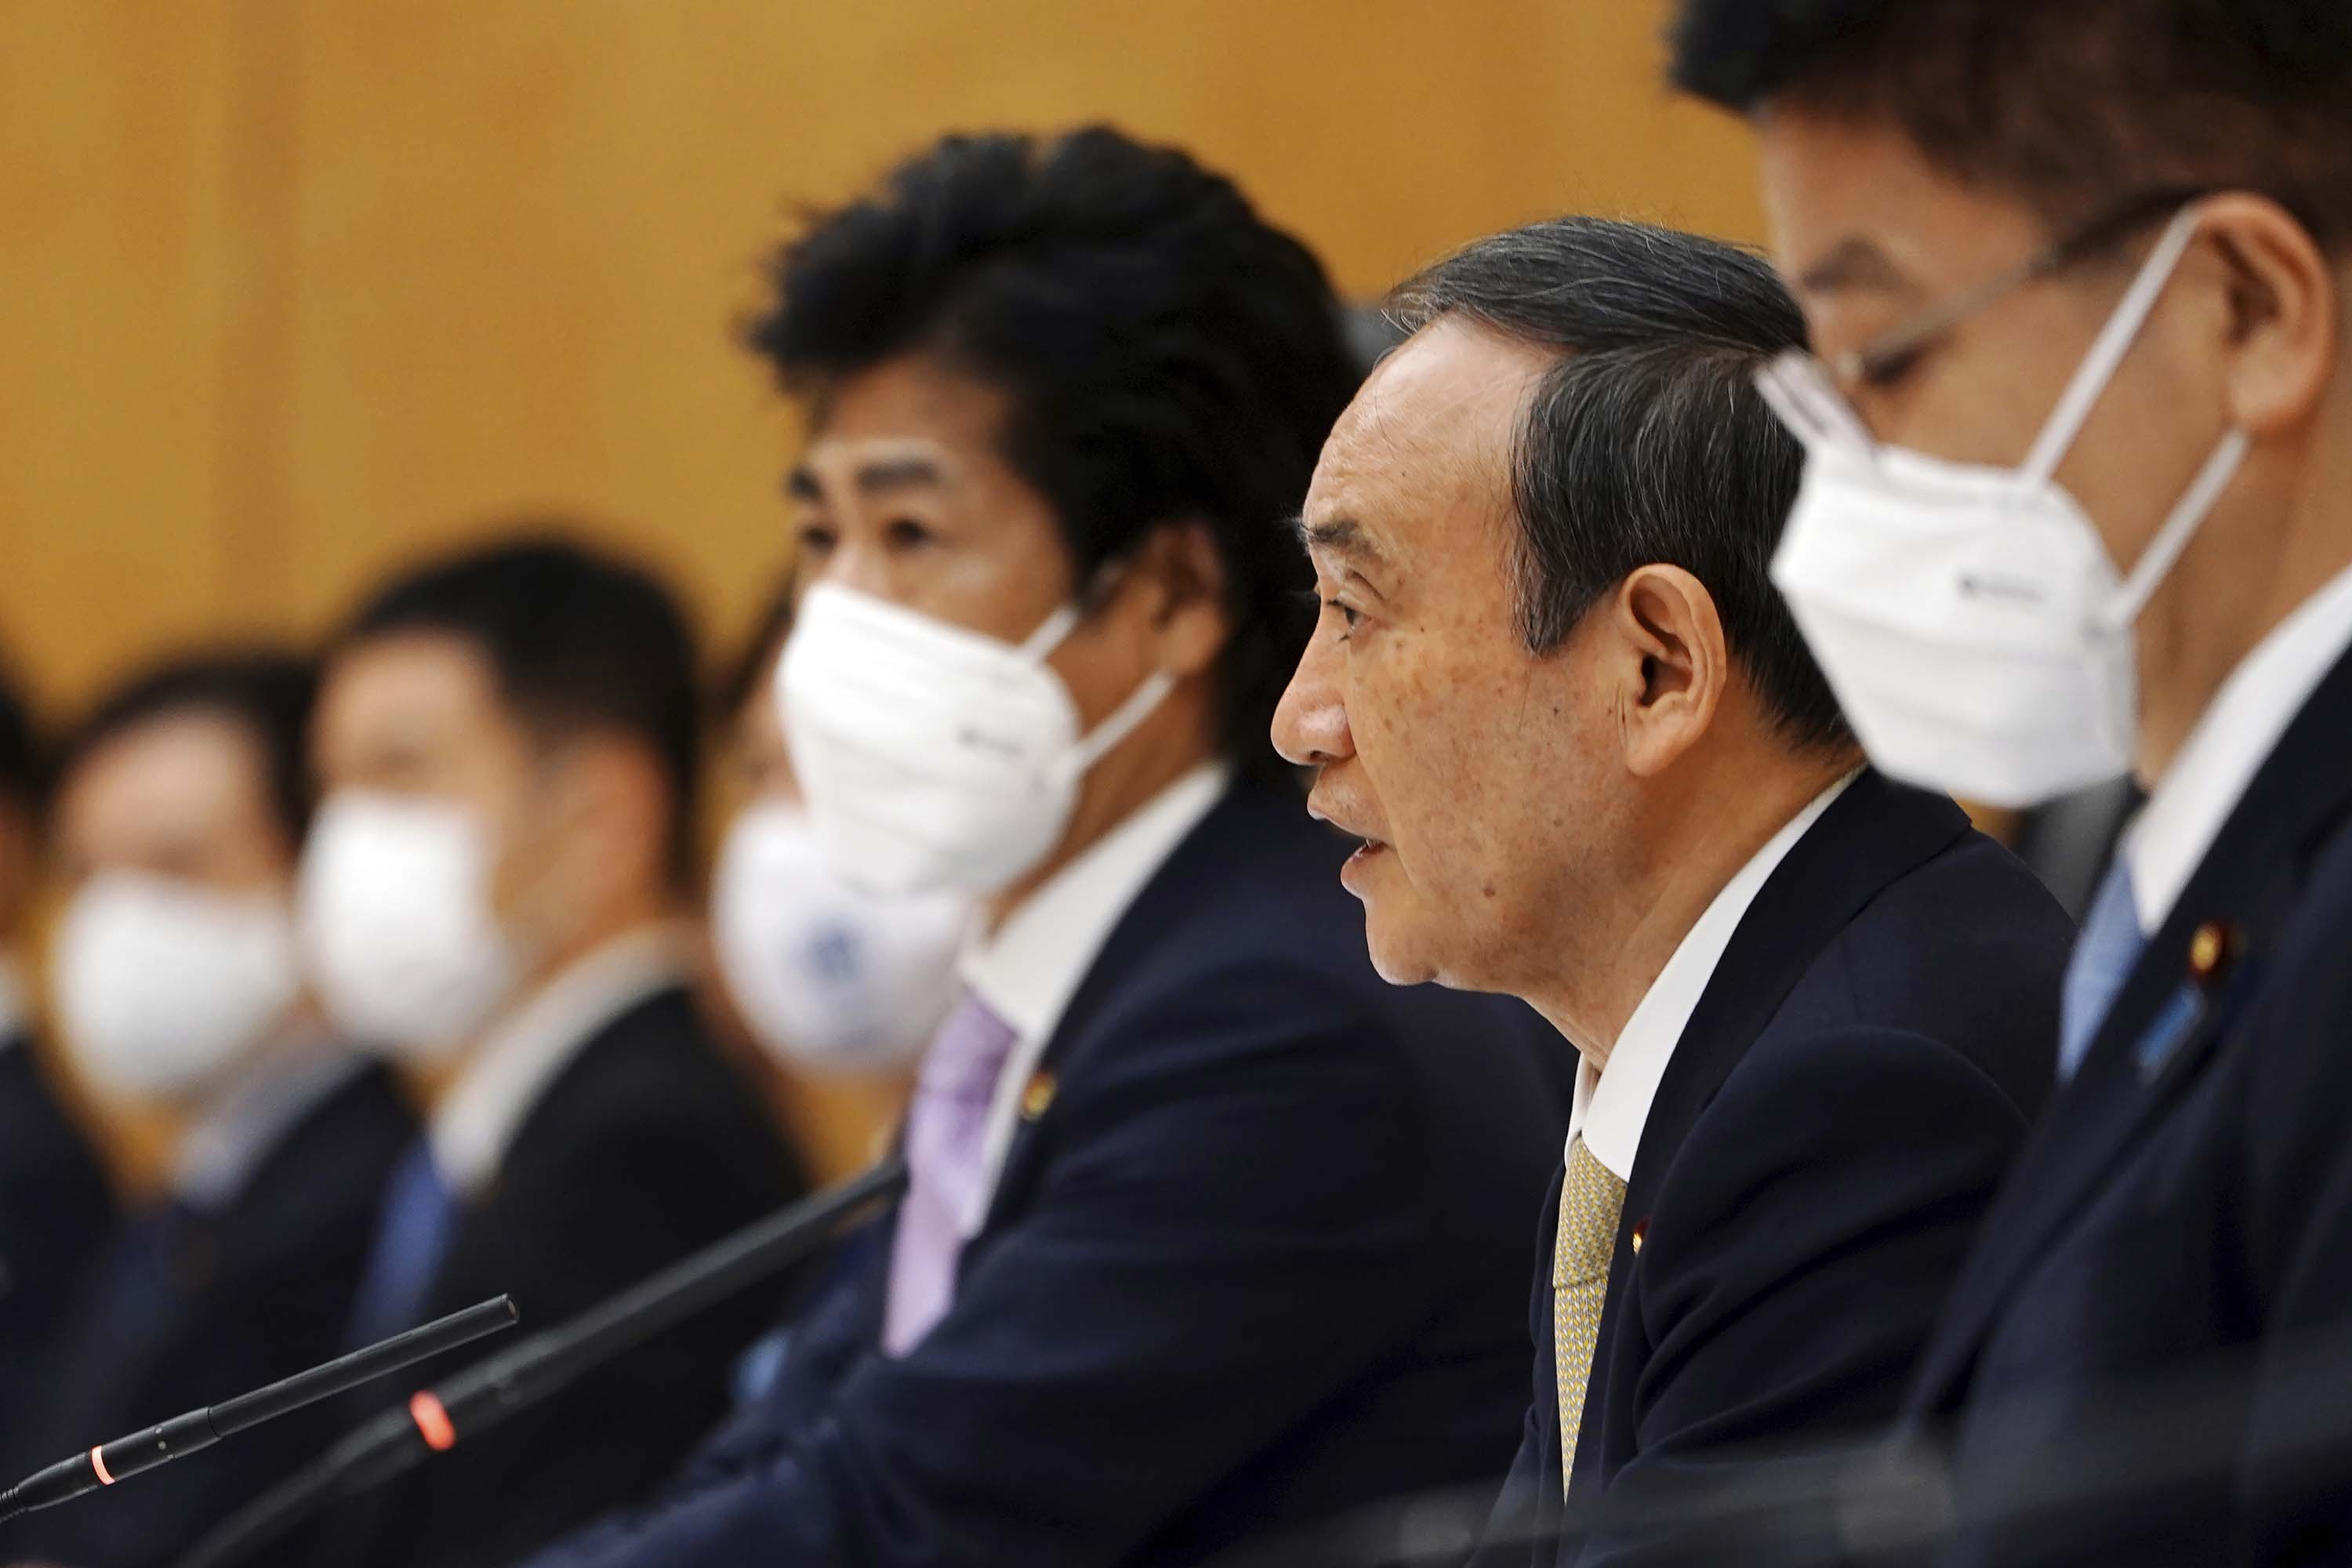 Japanese Prime Minister Yoshihide Suga, second from right, declares a state of emergency for Tokyo and three other prefectures during the government task force meeting on COVID-19 measures in Tokyo, Japan, on Friday, April 23.